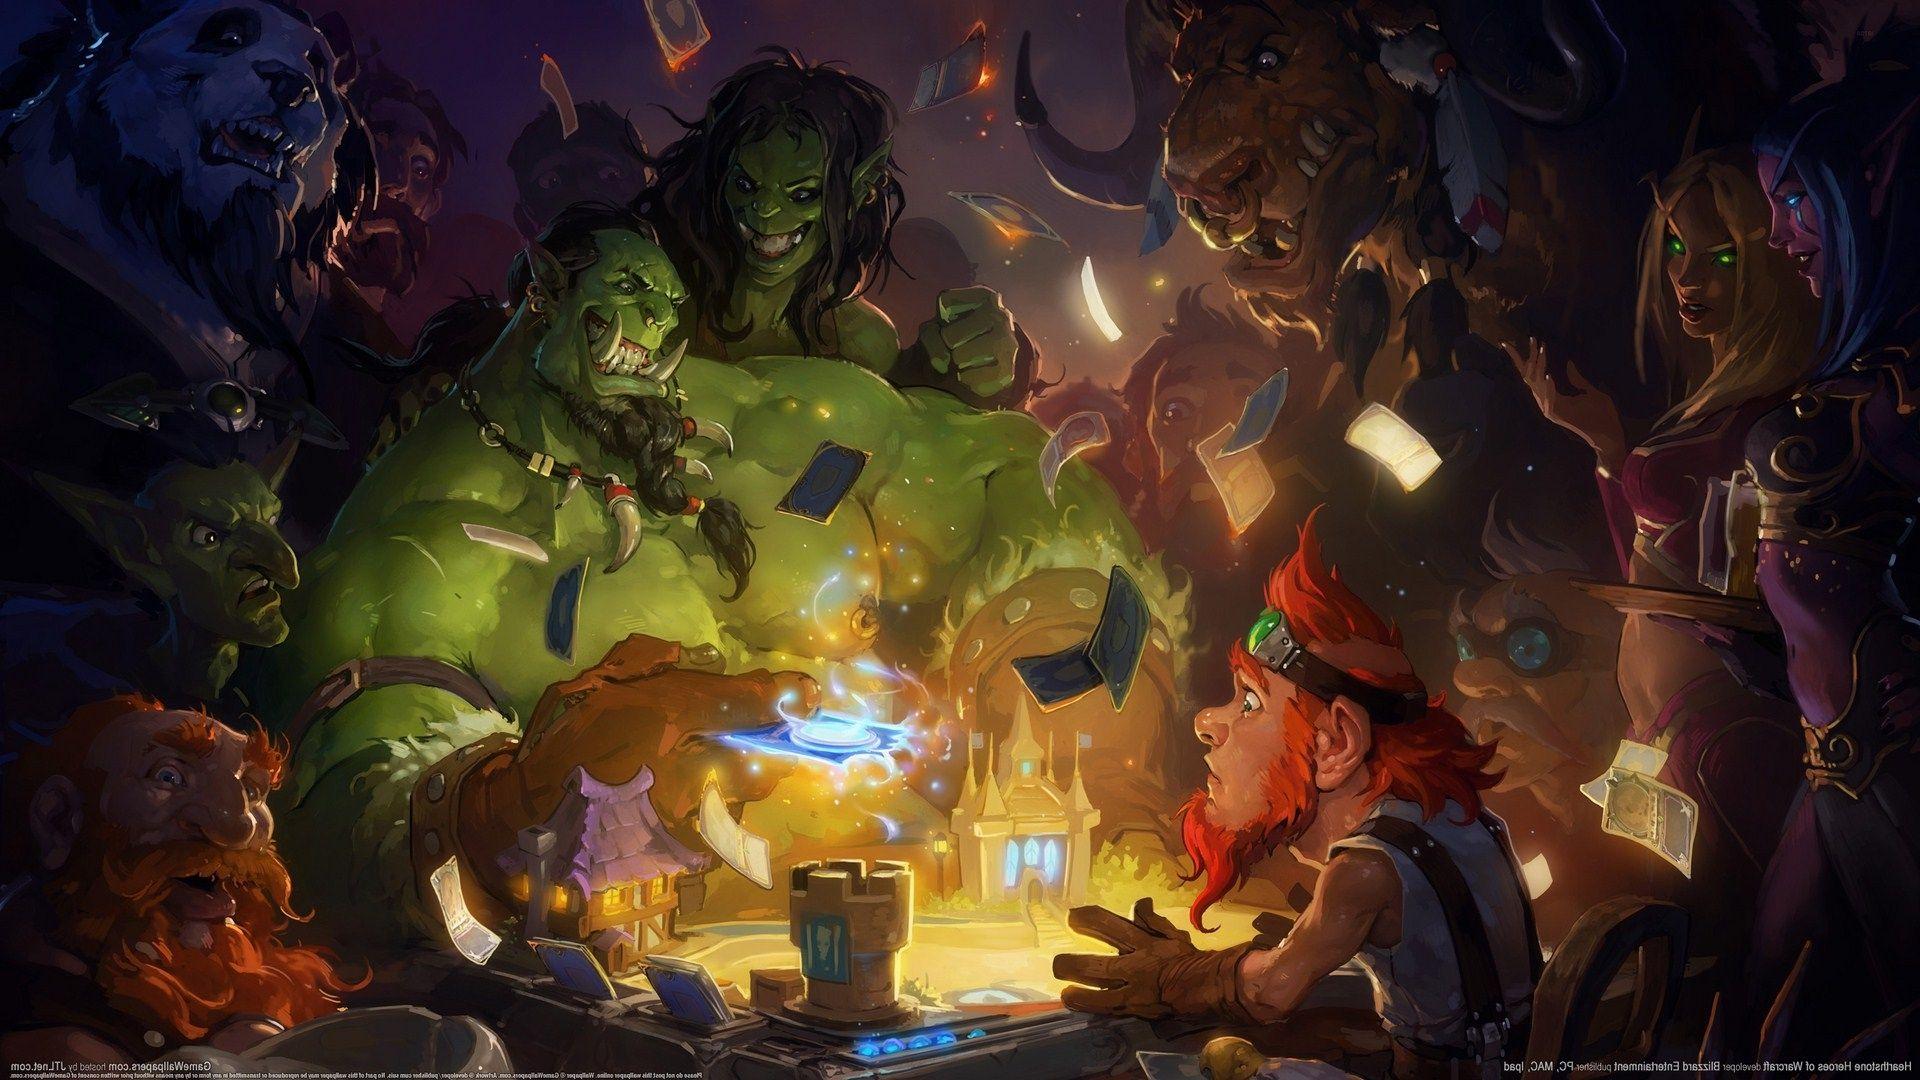 iphone xs hearthstone backgrounds